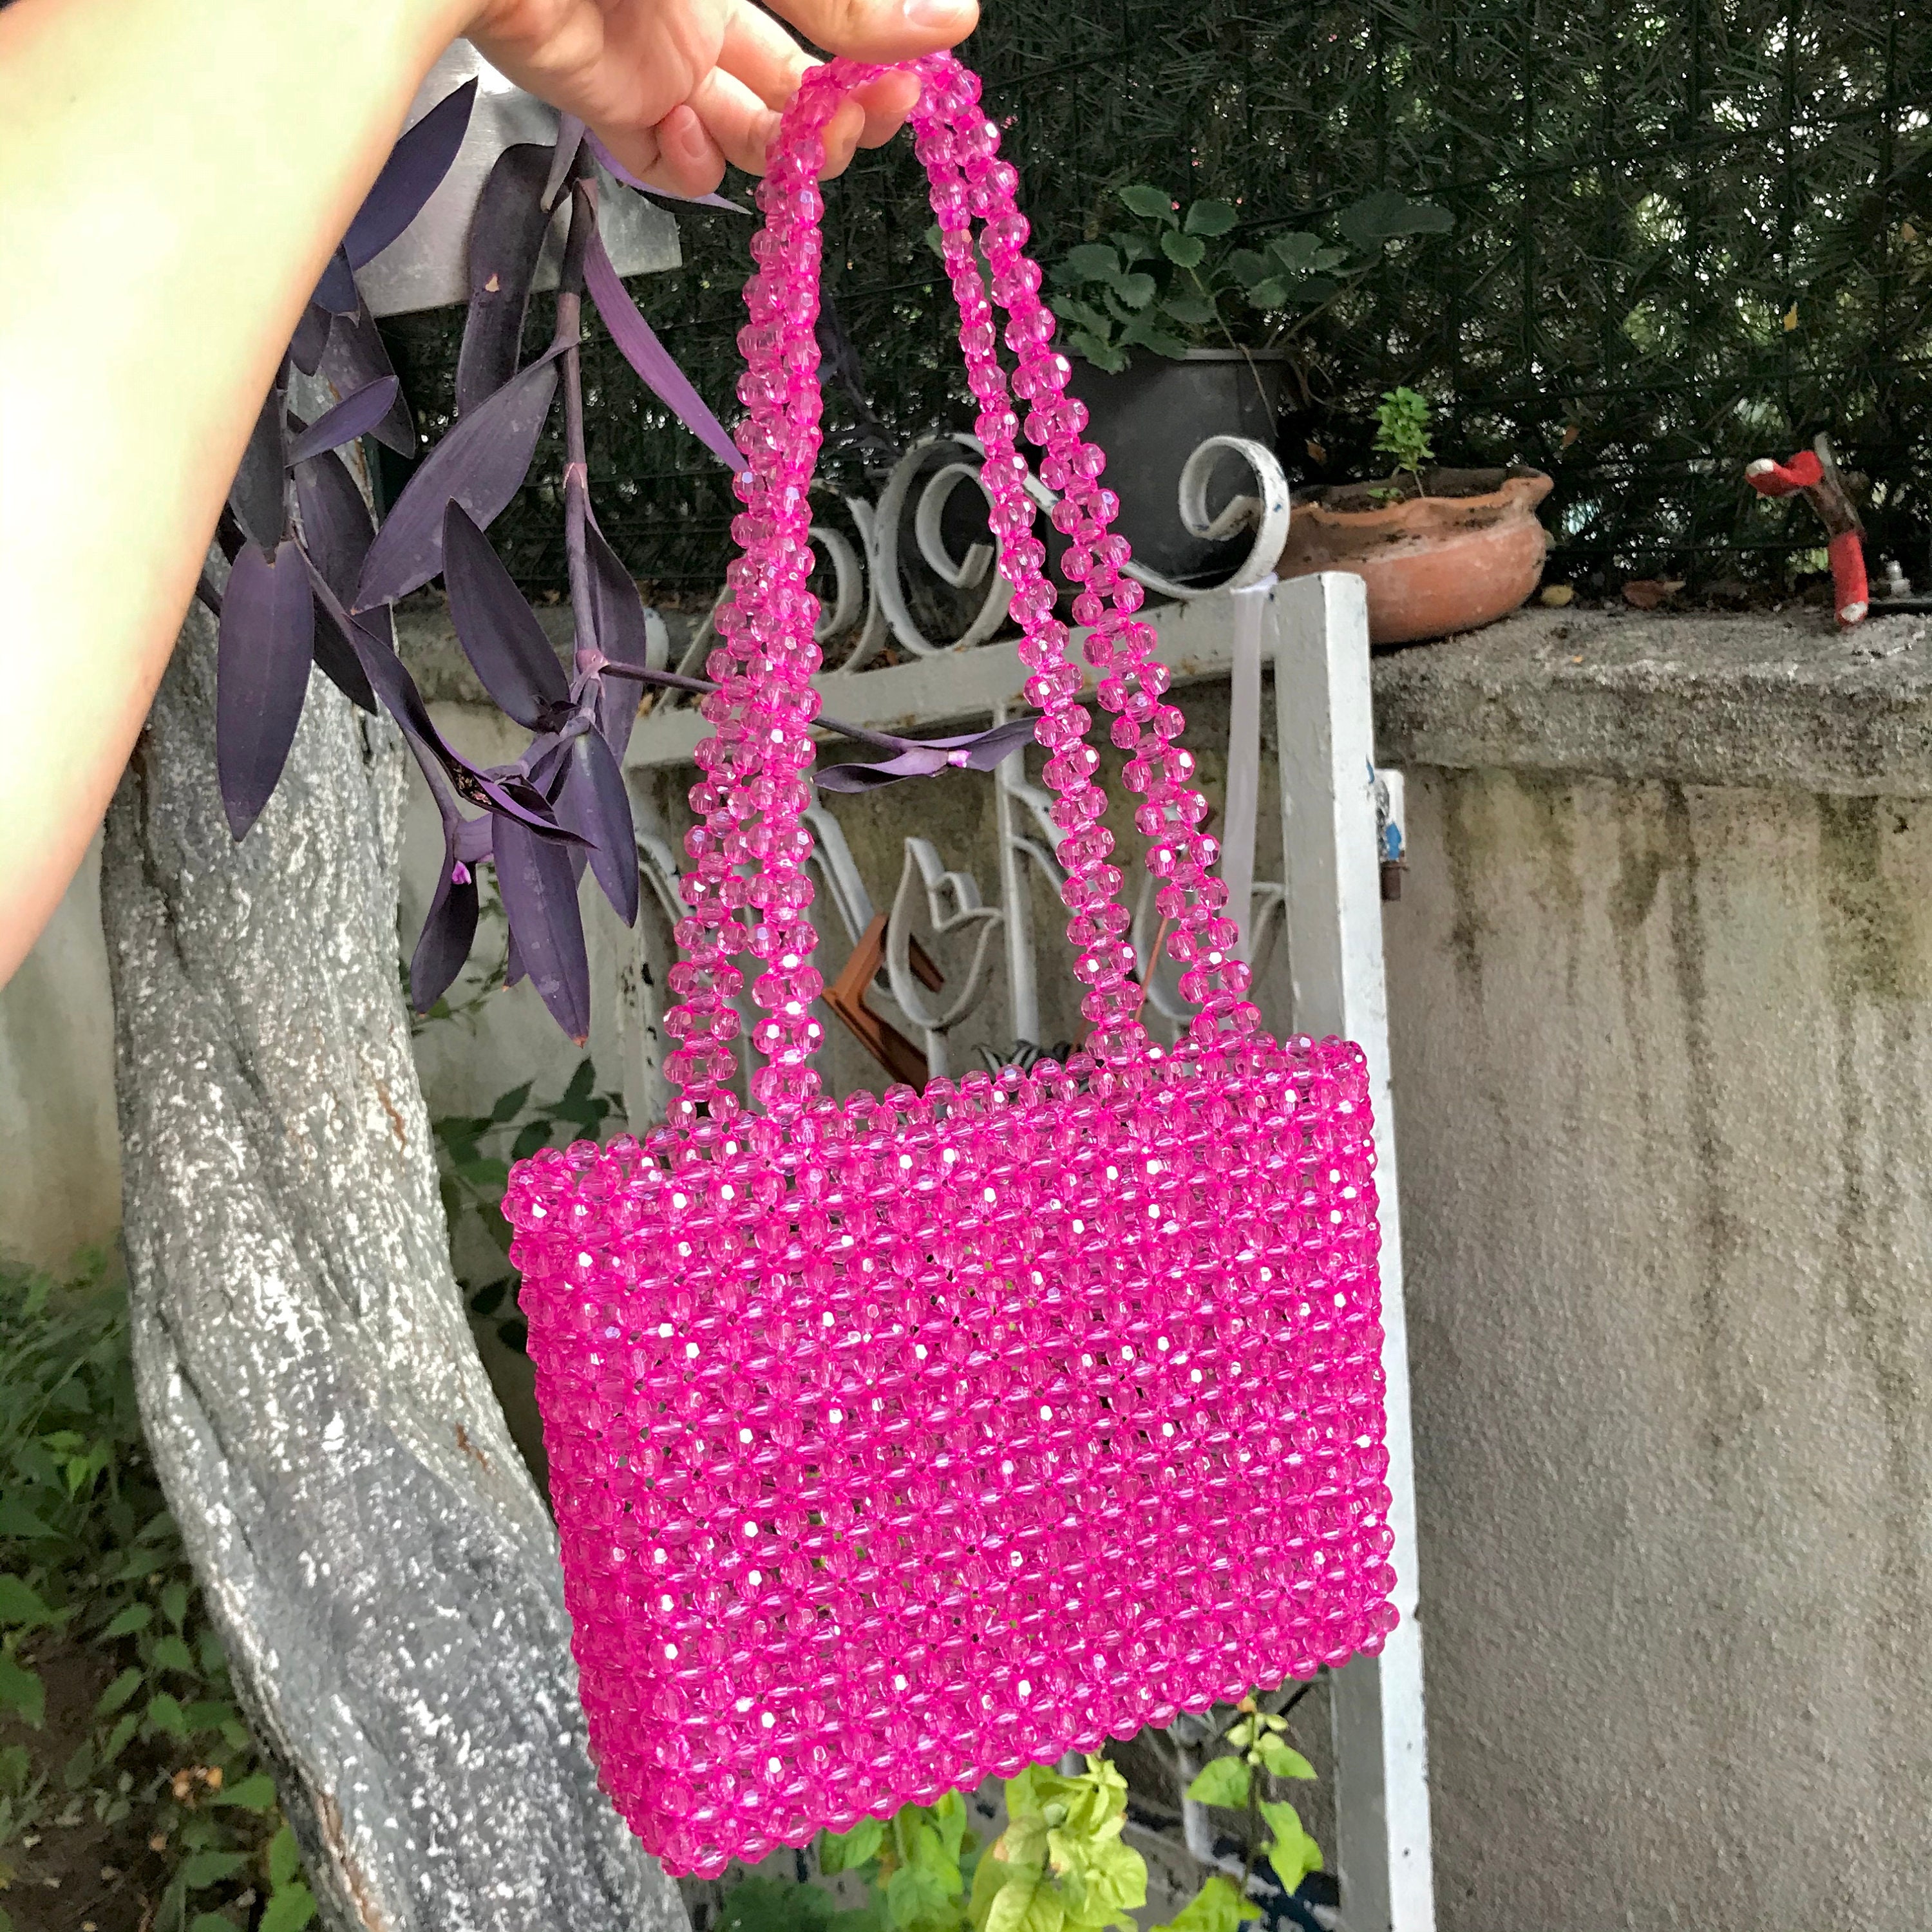 Clear Handbag With Crystals Pink Crystals Gift for Her Jewelry Bag 